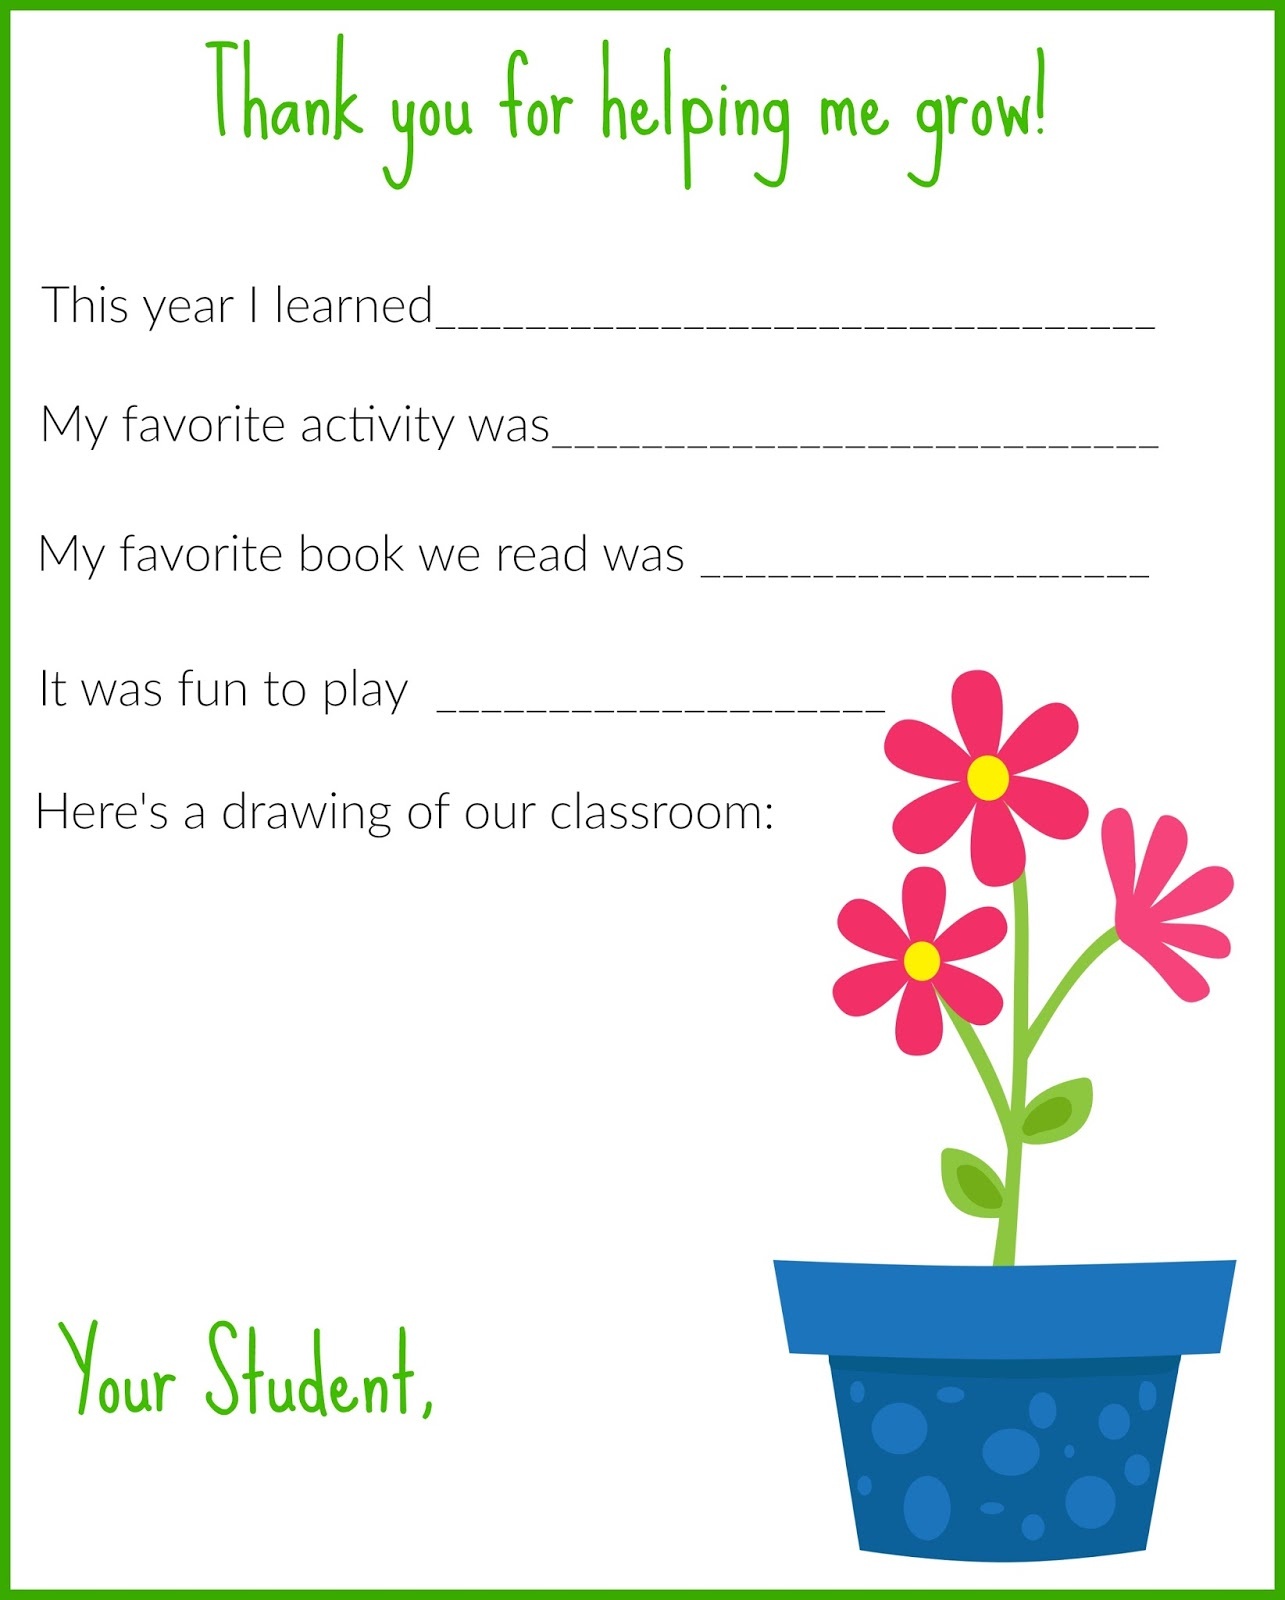 A Thank You Letter For Teachers {Free Printable} - The Chirping Moms - Free Printable Thank You Cards For Teachers